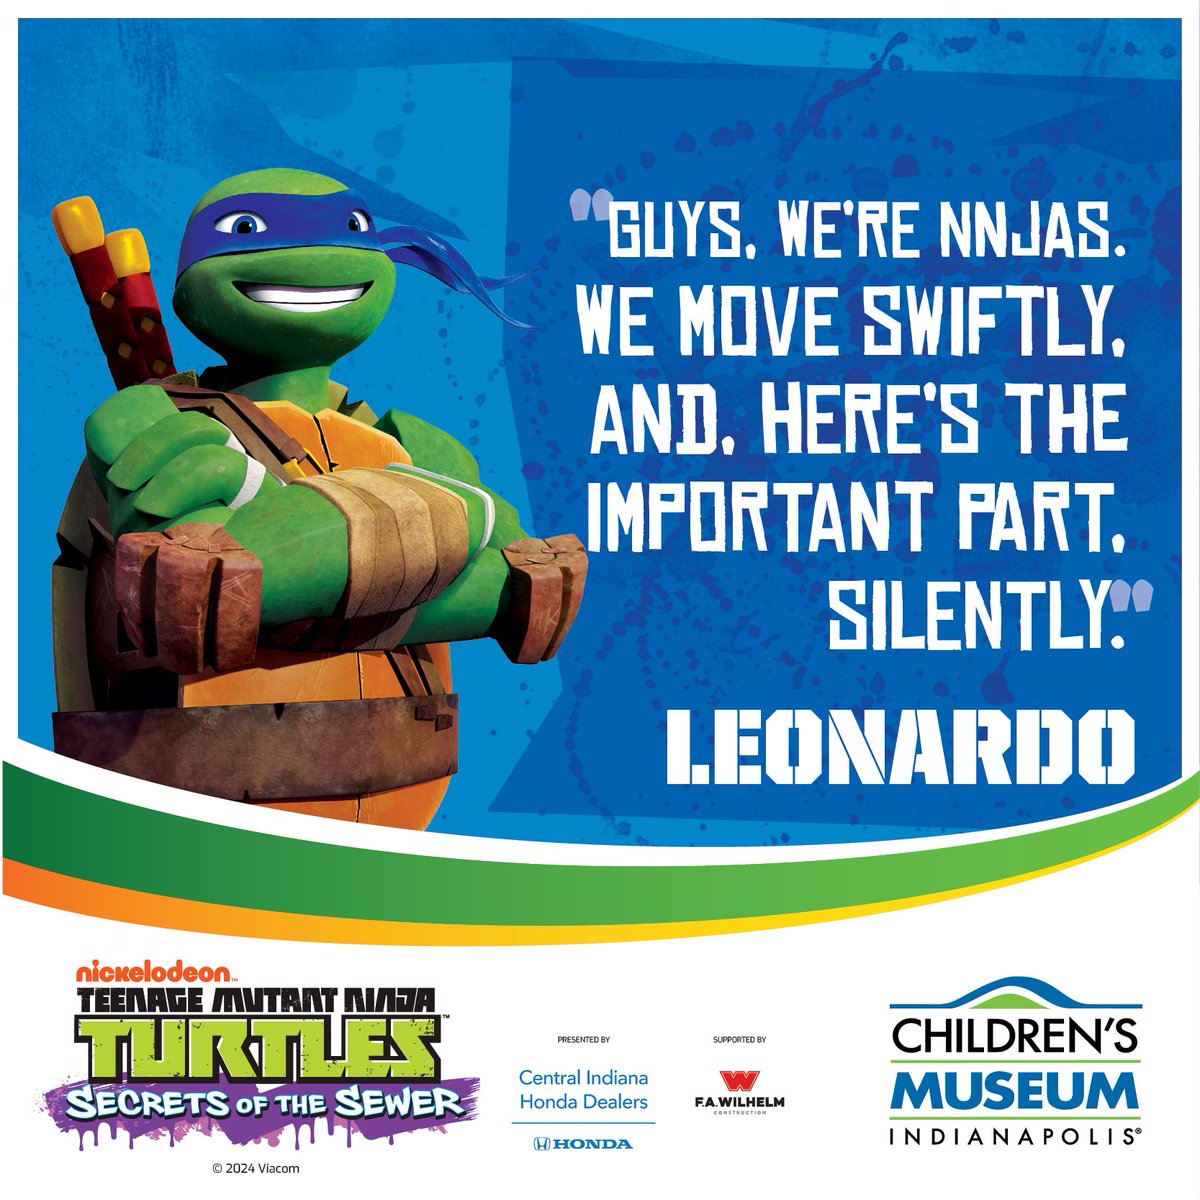 Psst … Have you heard? Four green teenage Turtles have snuck into the museum and are training our young ninja hopefuls! (They may be eating some pizza too!) Join this Turtle amongst the rest inside Teenage Mutant Ninja Turtles: Secrets of the Sewer— bit.ly/41R3YzC